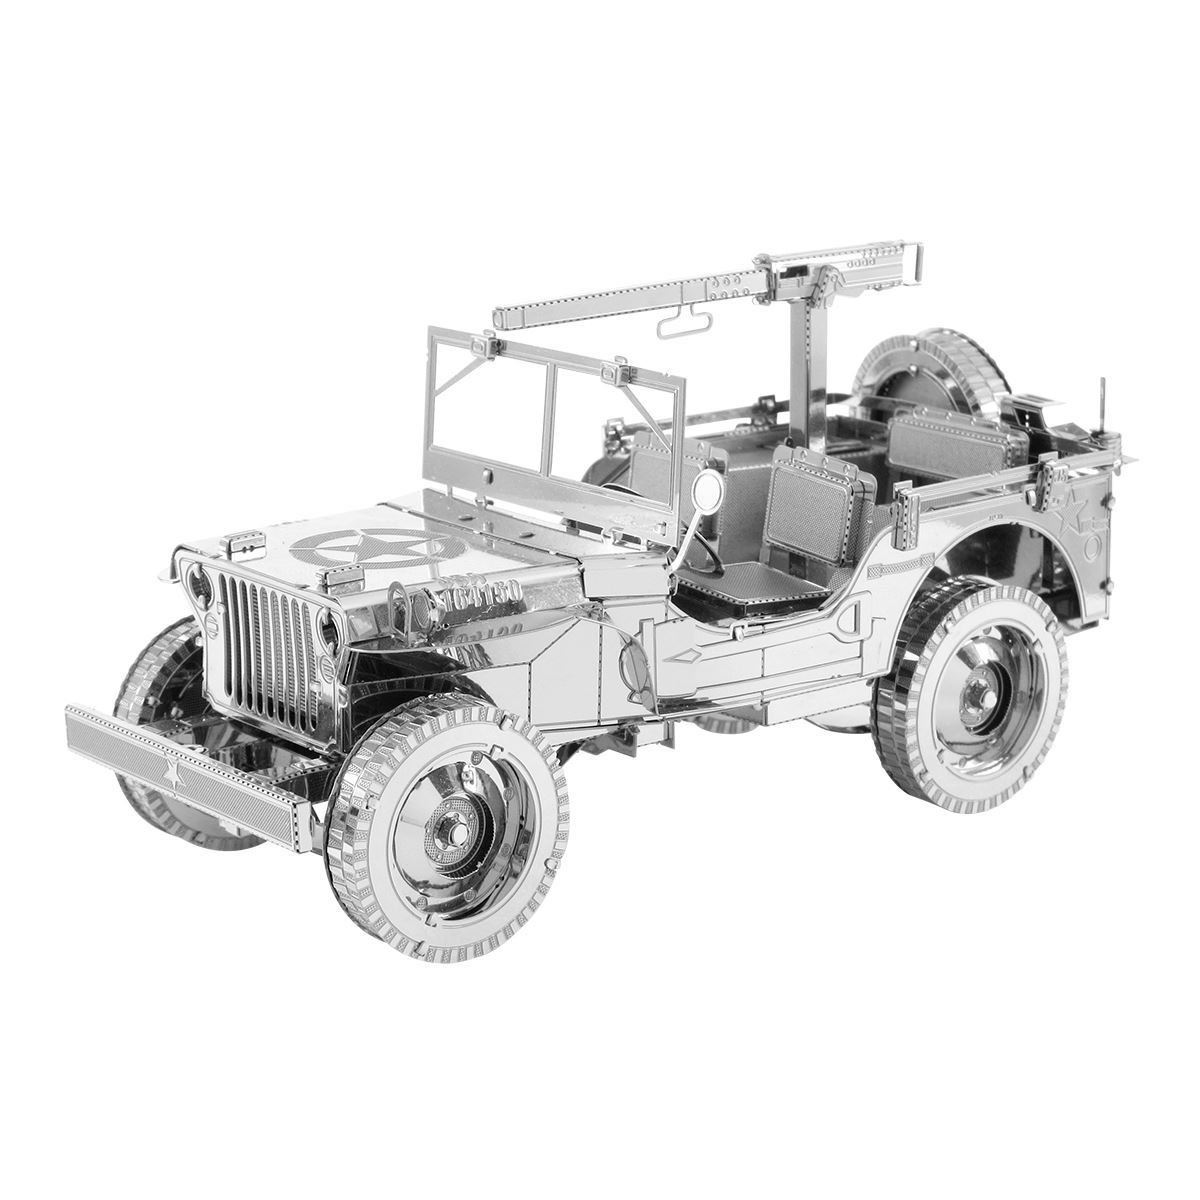 Details about   NEW CHROMED MIRROR & ADJUSTABLE ARM WILLYS MB JEEP 